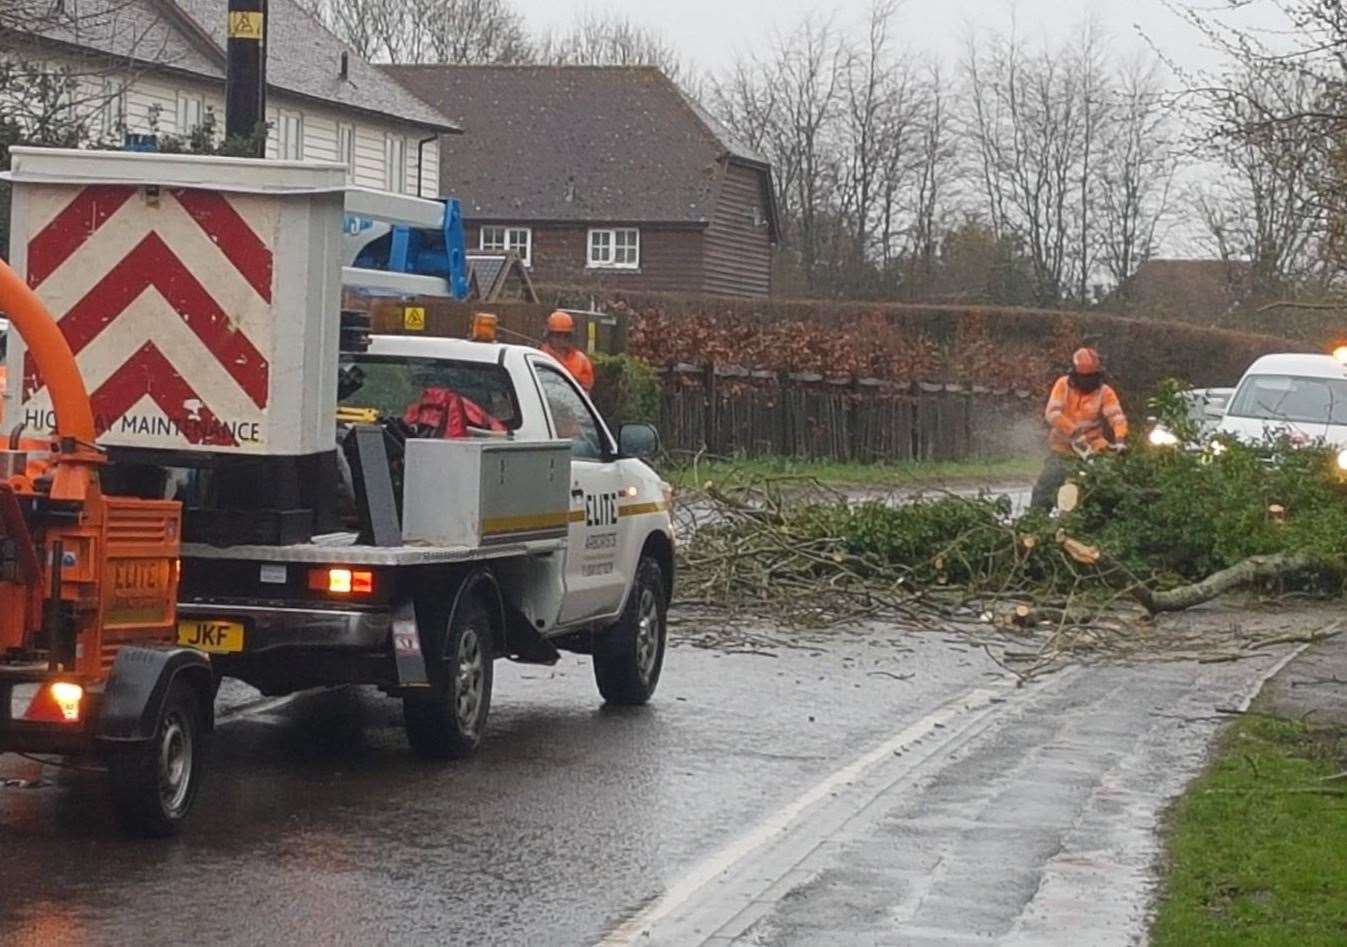 The tree fell on the A251